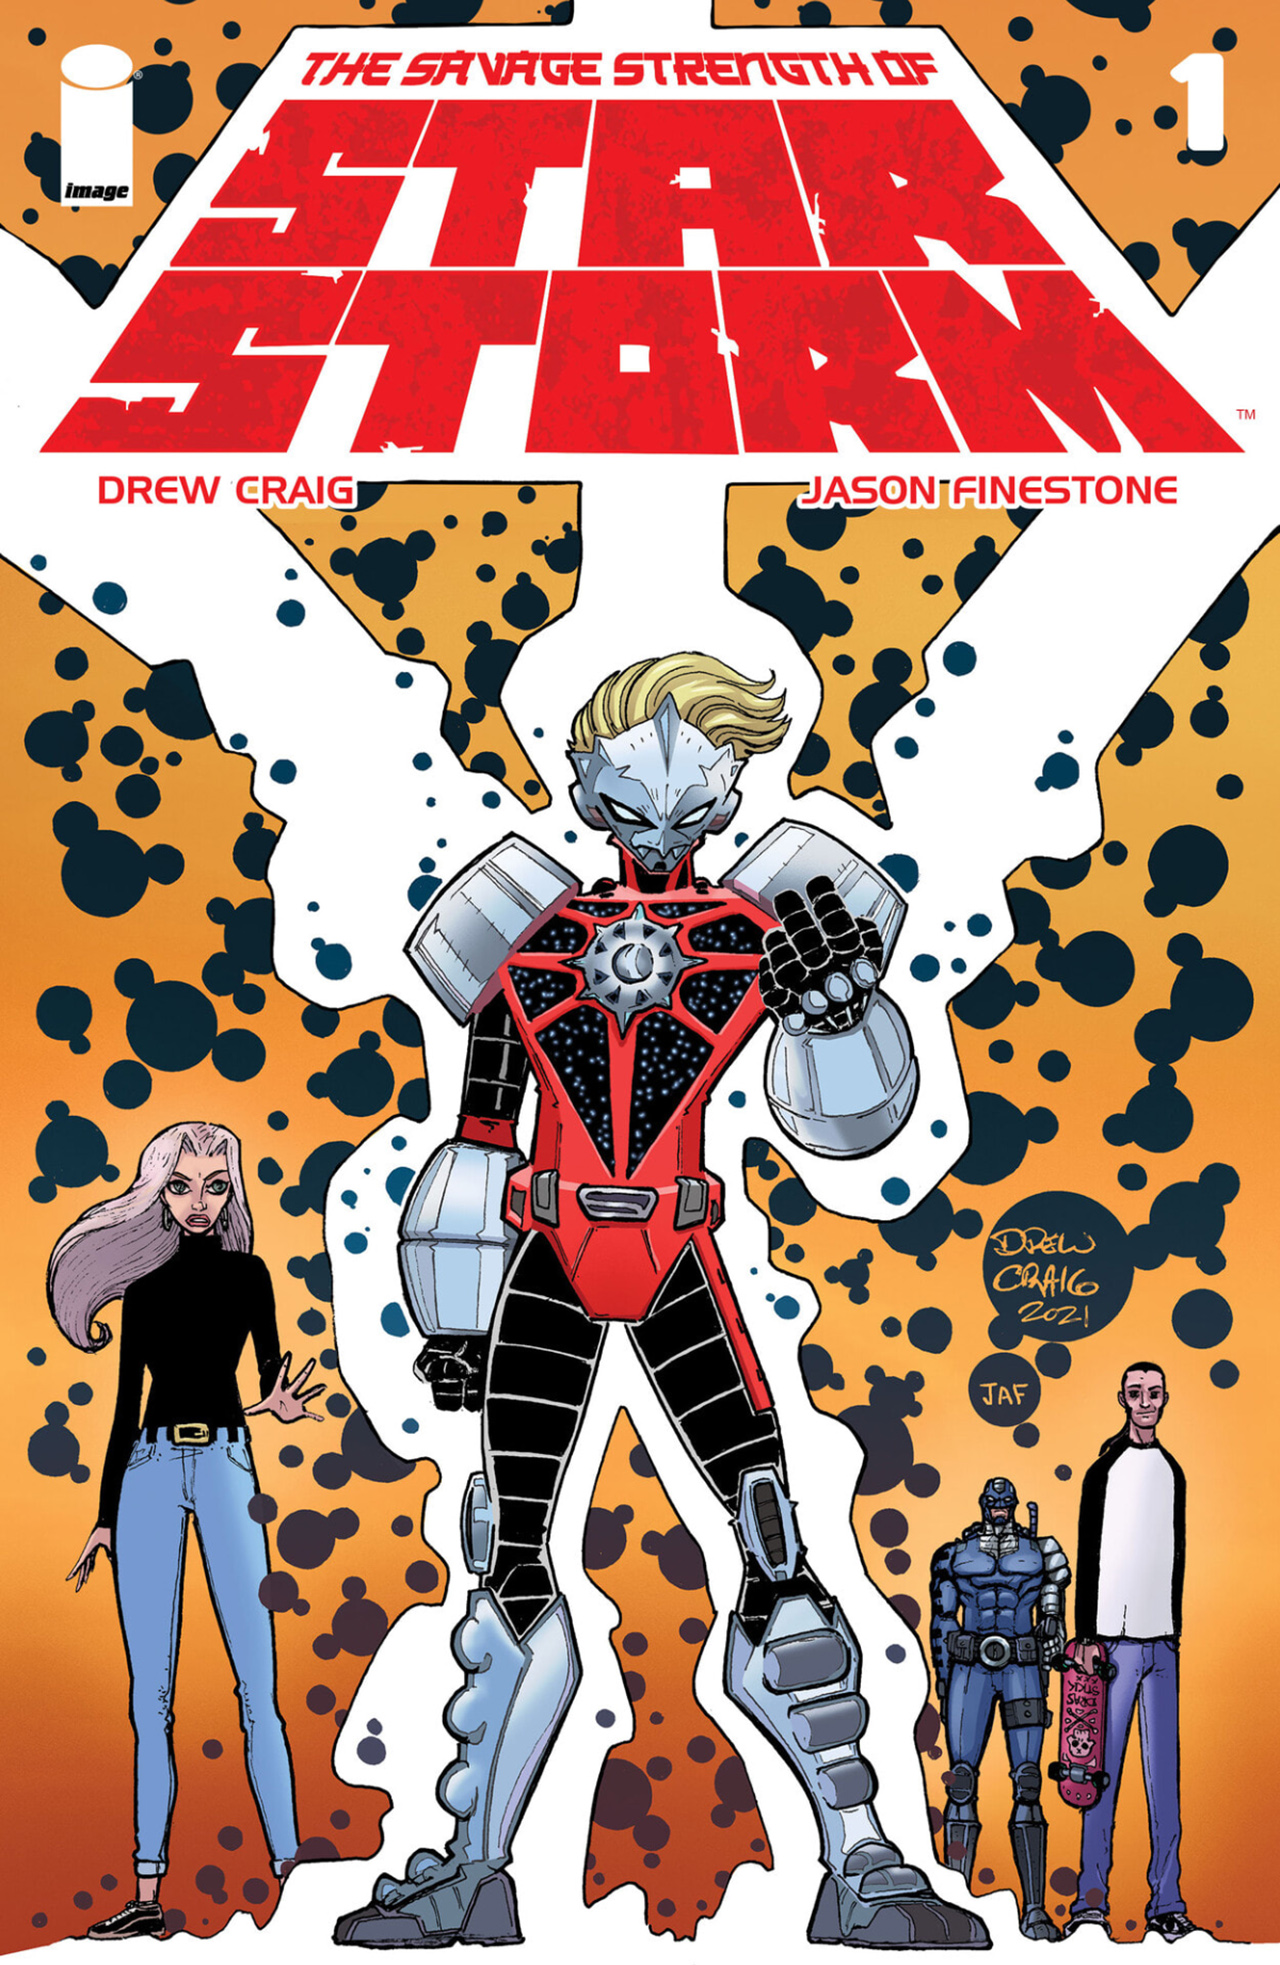 Read online The Savage Strength of Starstorm comic -  Issue #1 - 1